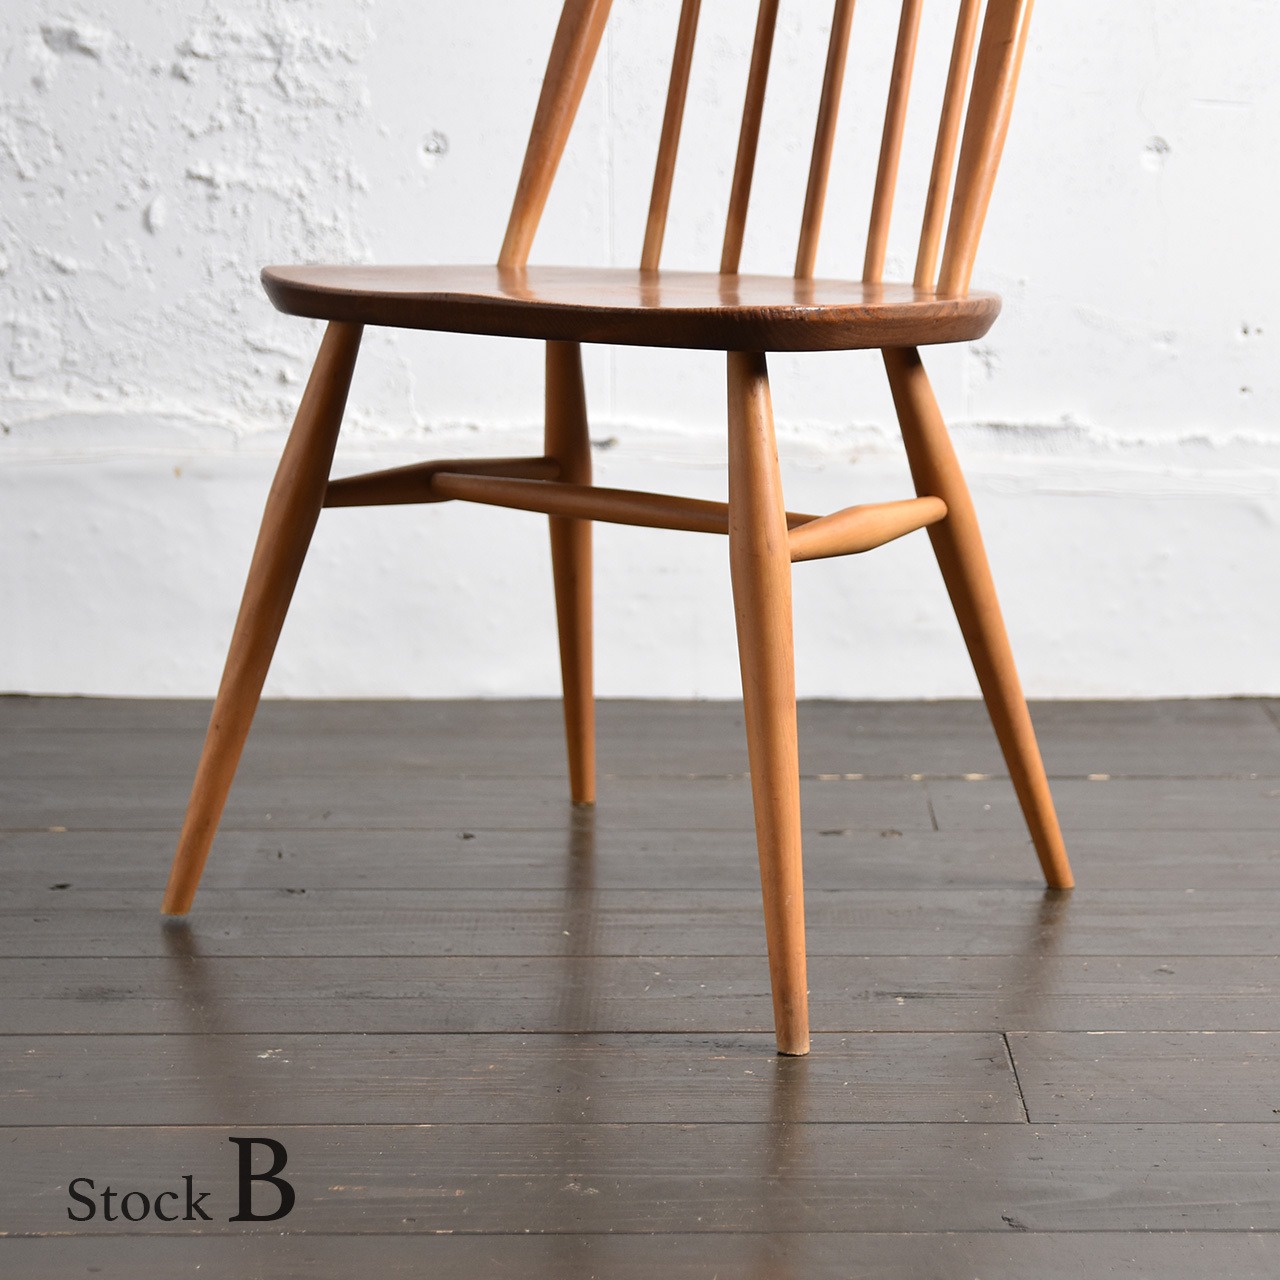 Ercol Quaker Chair 【B】 / アーコール クエーカー チェア / 2210BNS-001B